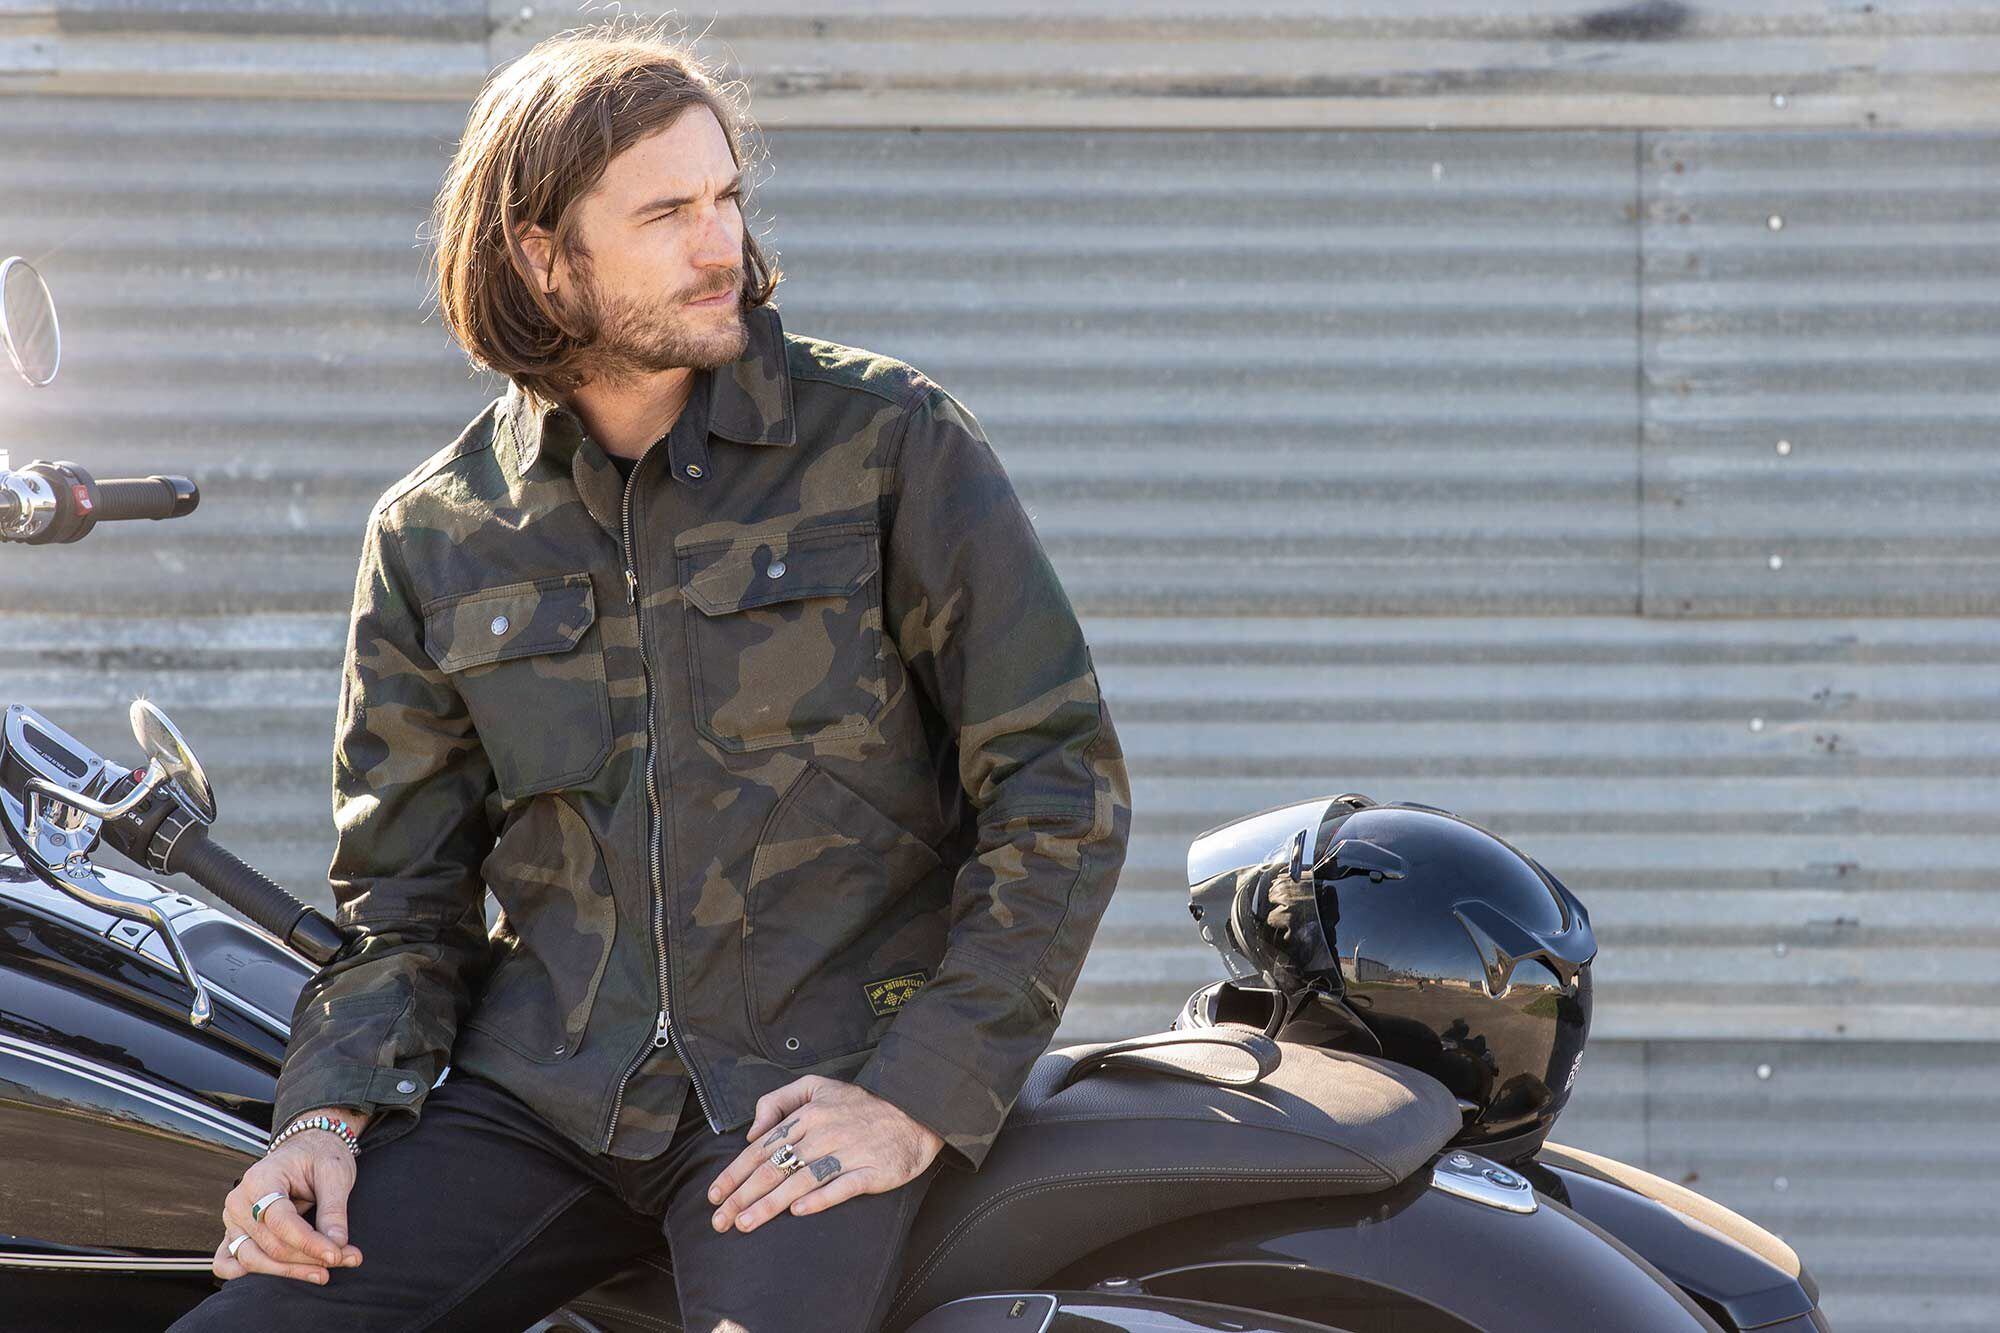 The two-zipper closure on the Driggs jacket allows for a better fit while sitting.